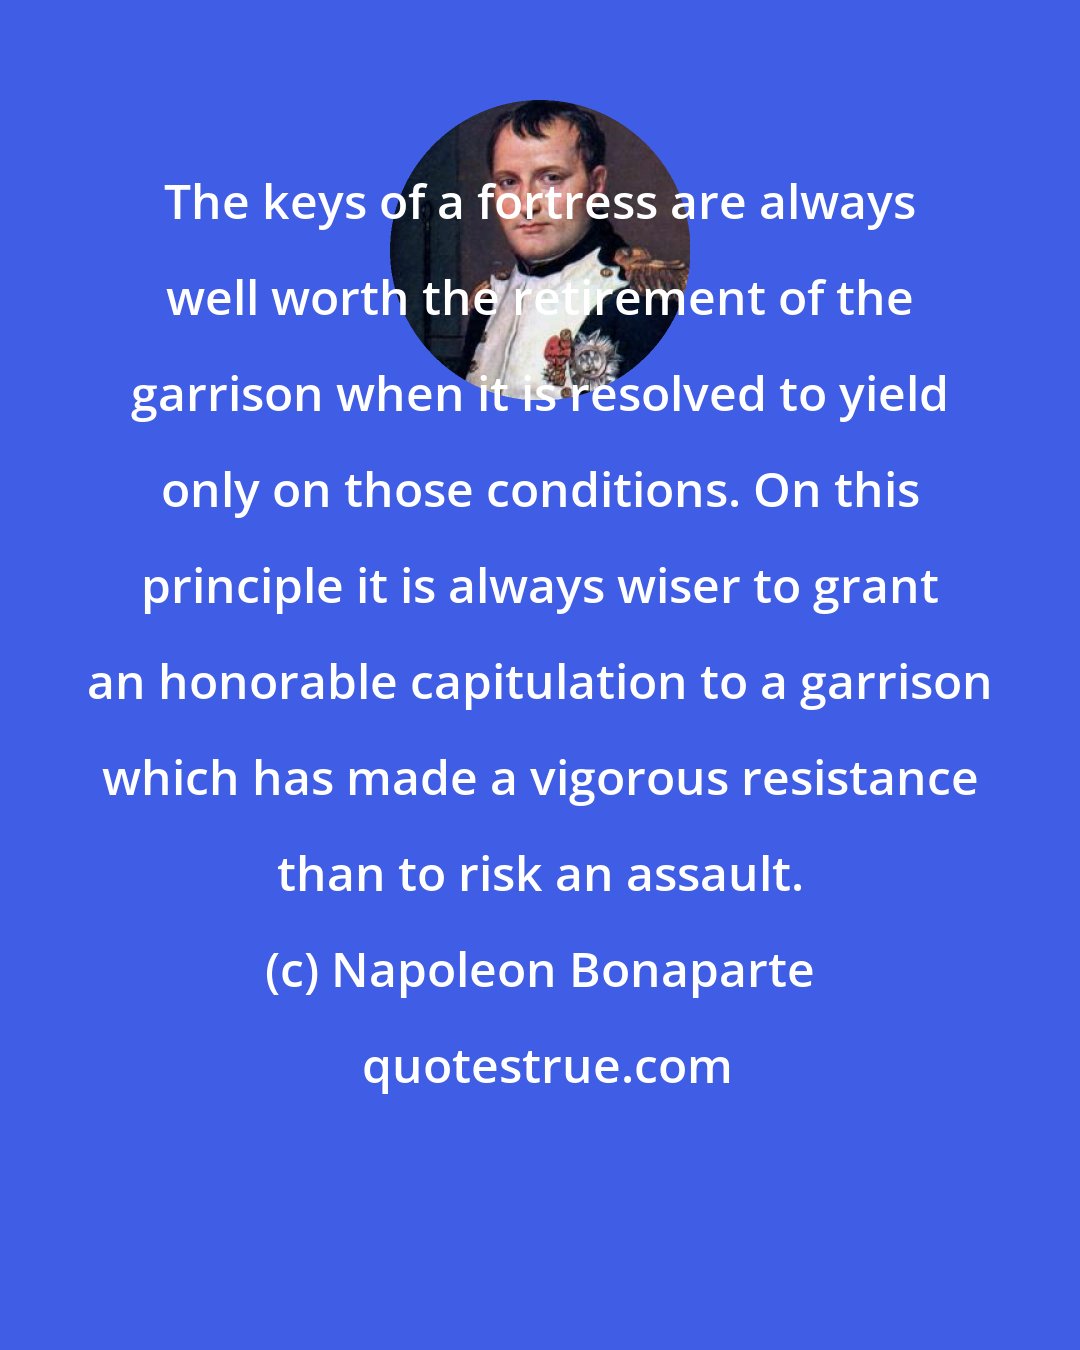 Napoleon Bonaparte: The keys of a fortress are always well worth the retirement of the garrison when it is resolved to yield only on those conditions. On this principle it is always wiser to grant an honorable capitulation to a garrison which has made a vigorous resistance than to risk an assault.